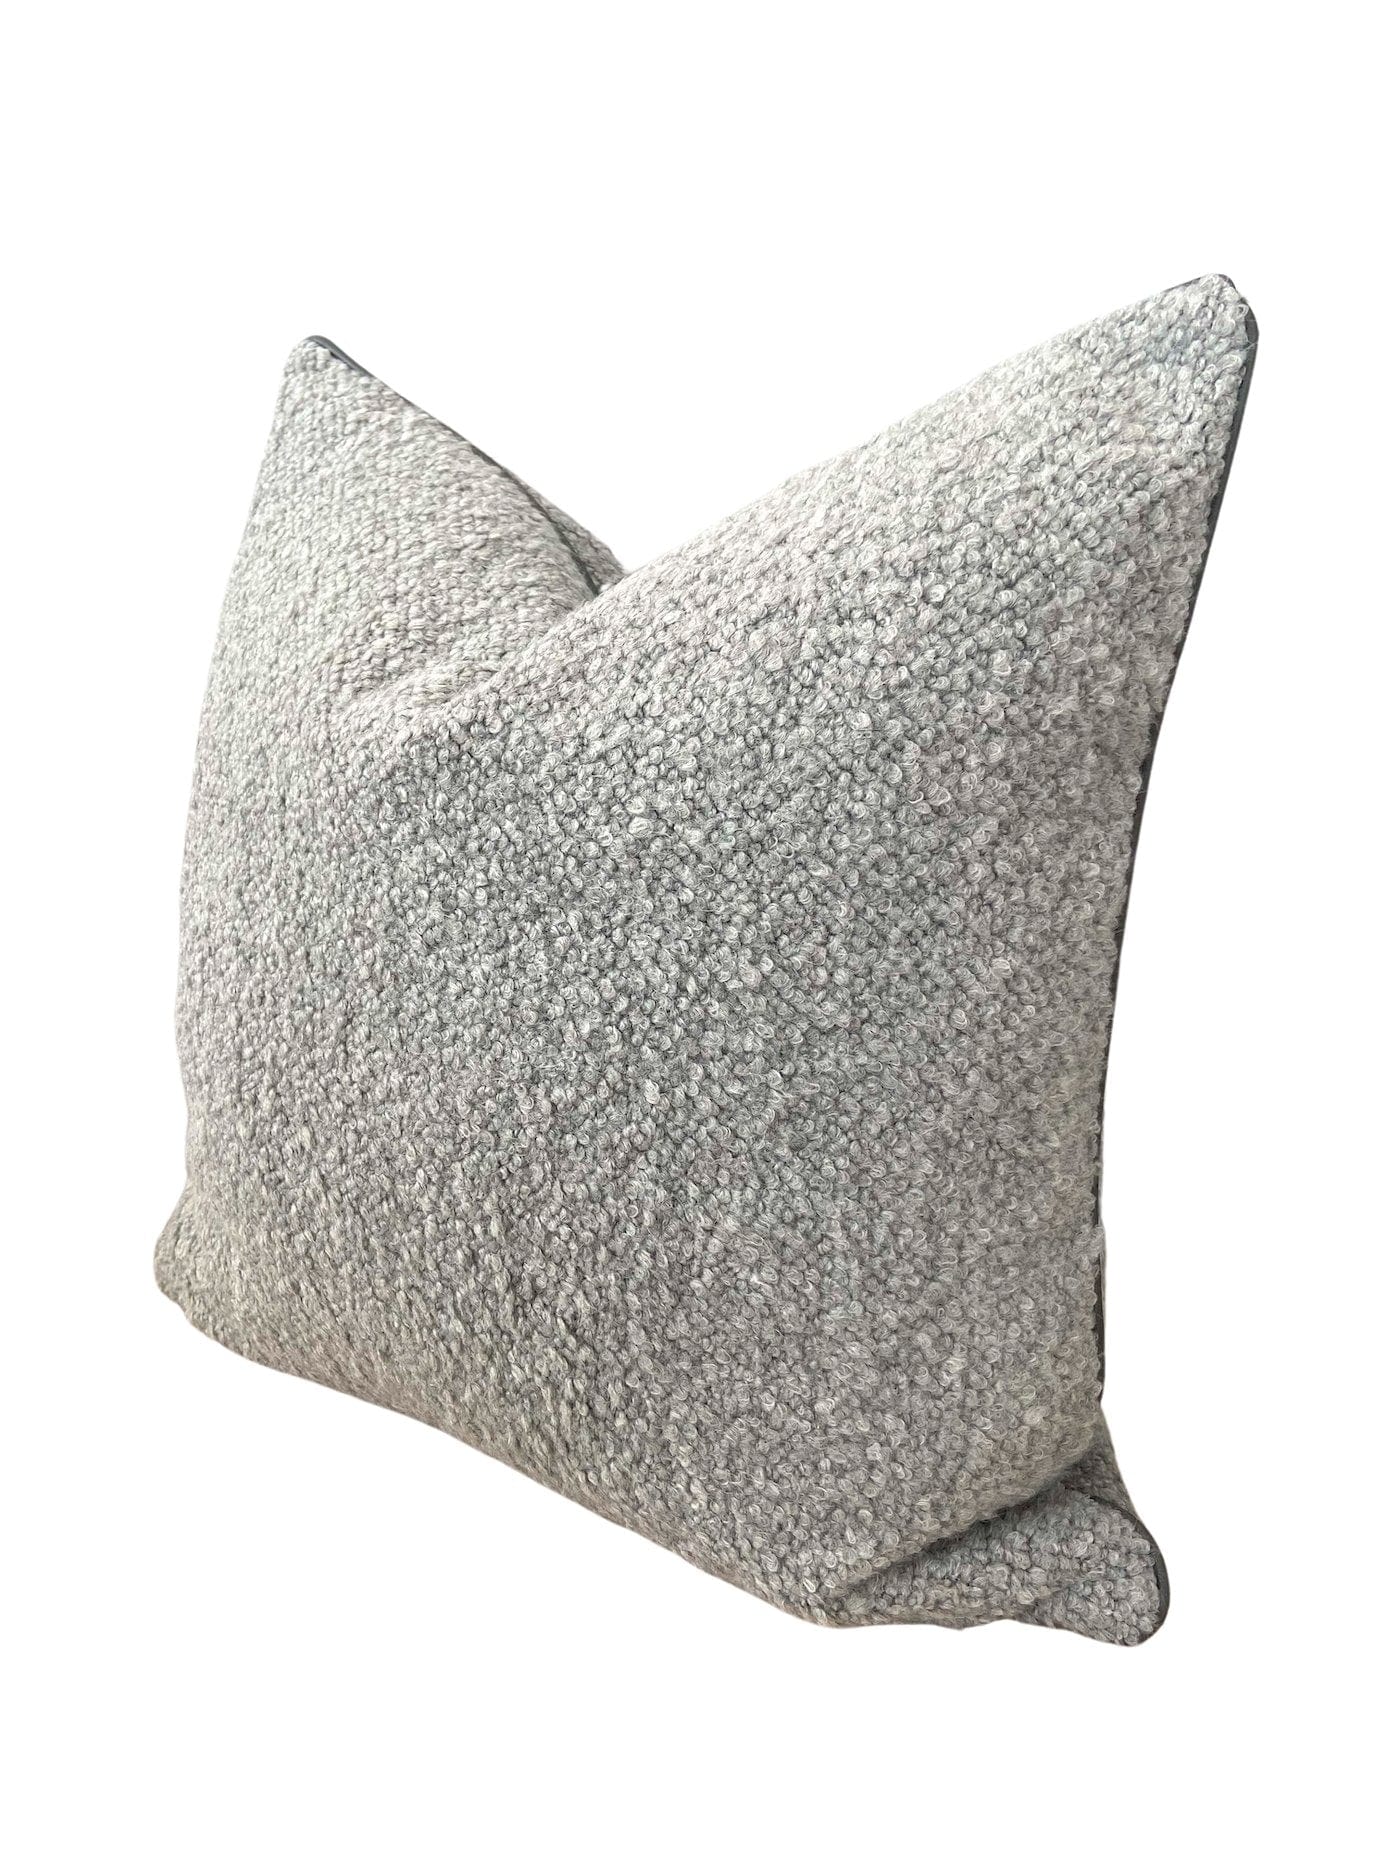 norsuHOME Cushions norsuHOME Cushion, Bouclé Frost with Charcoal Leather Piping (6582422503612)